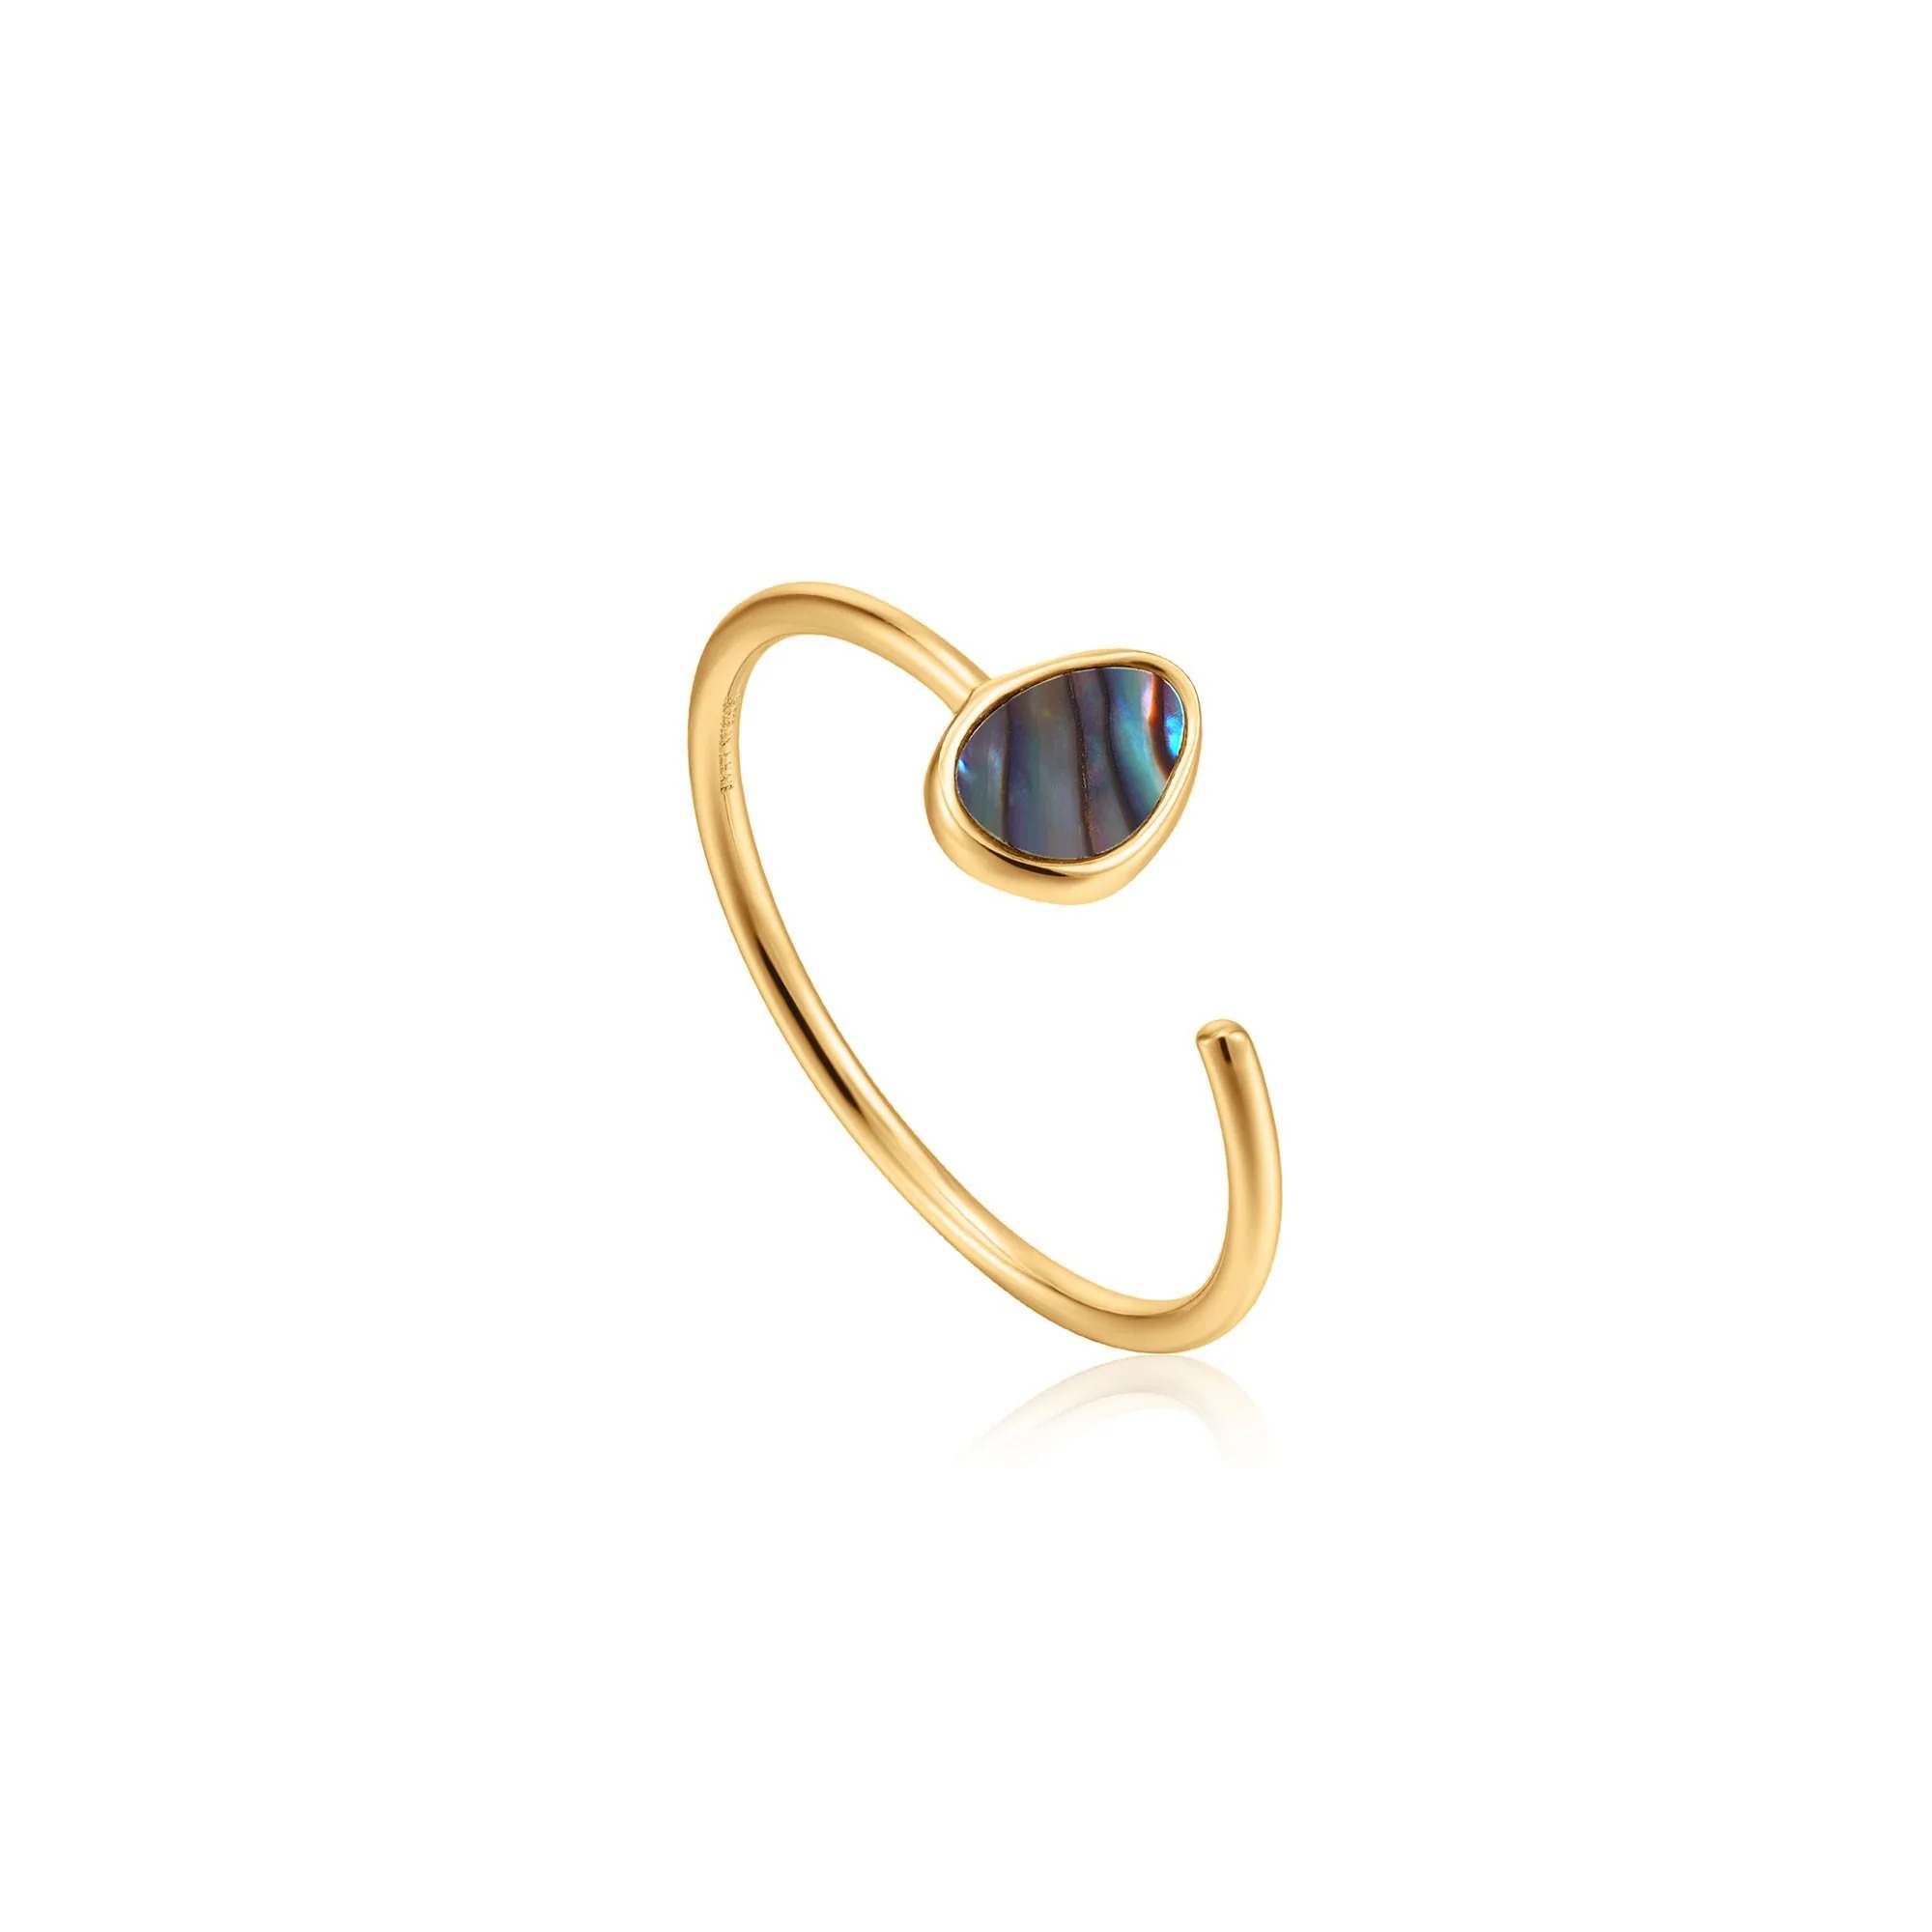 ANIA HAIE Tidal Abalone Adjustable Ring, Gold-Plated